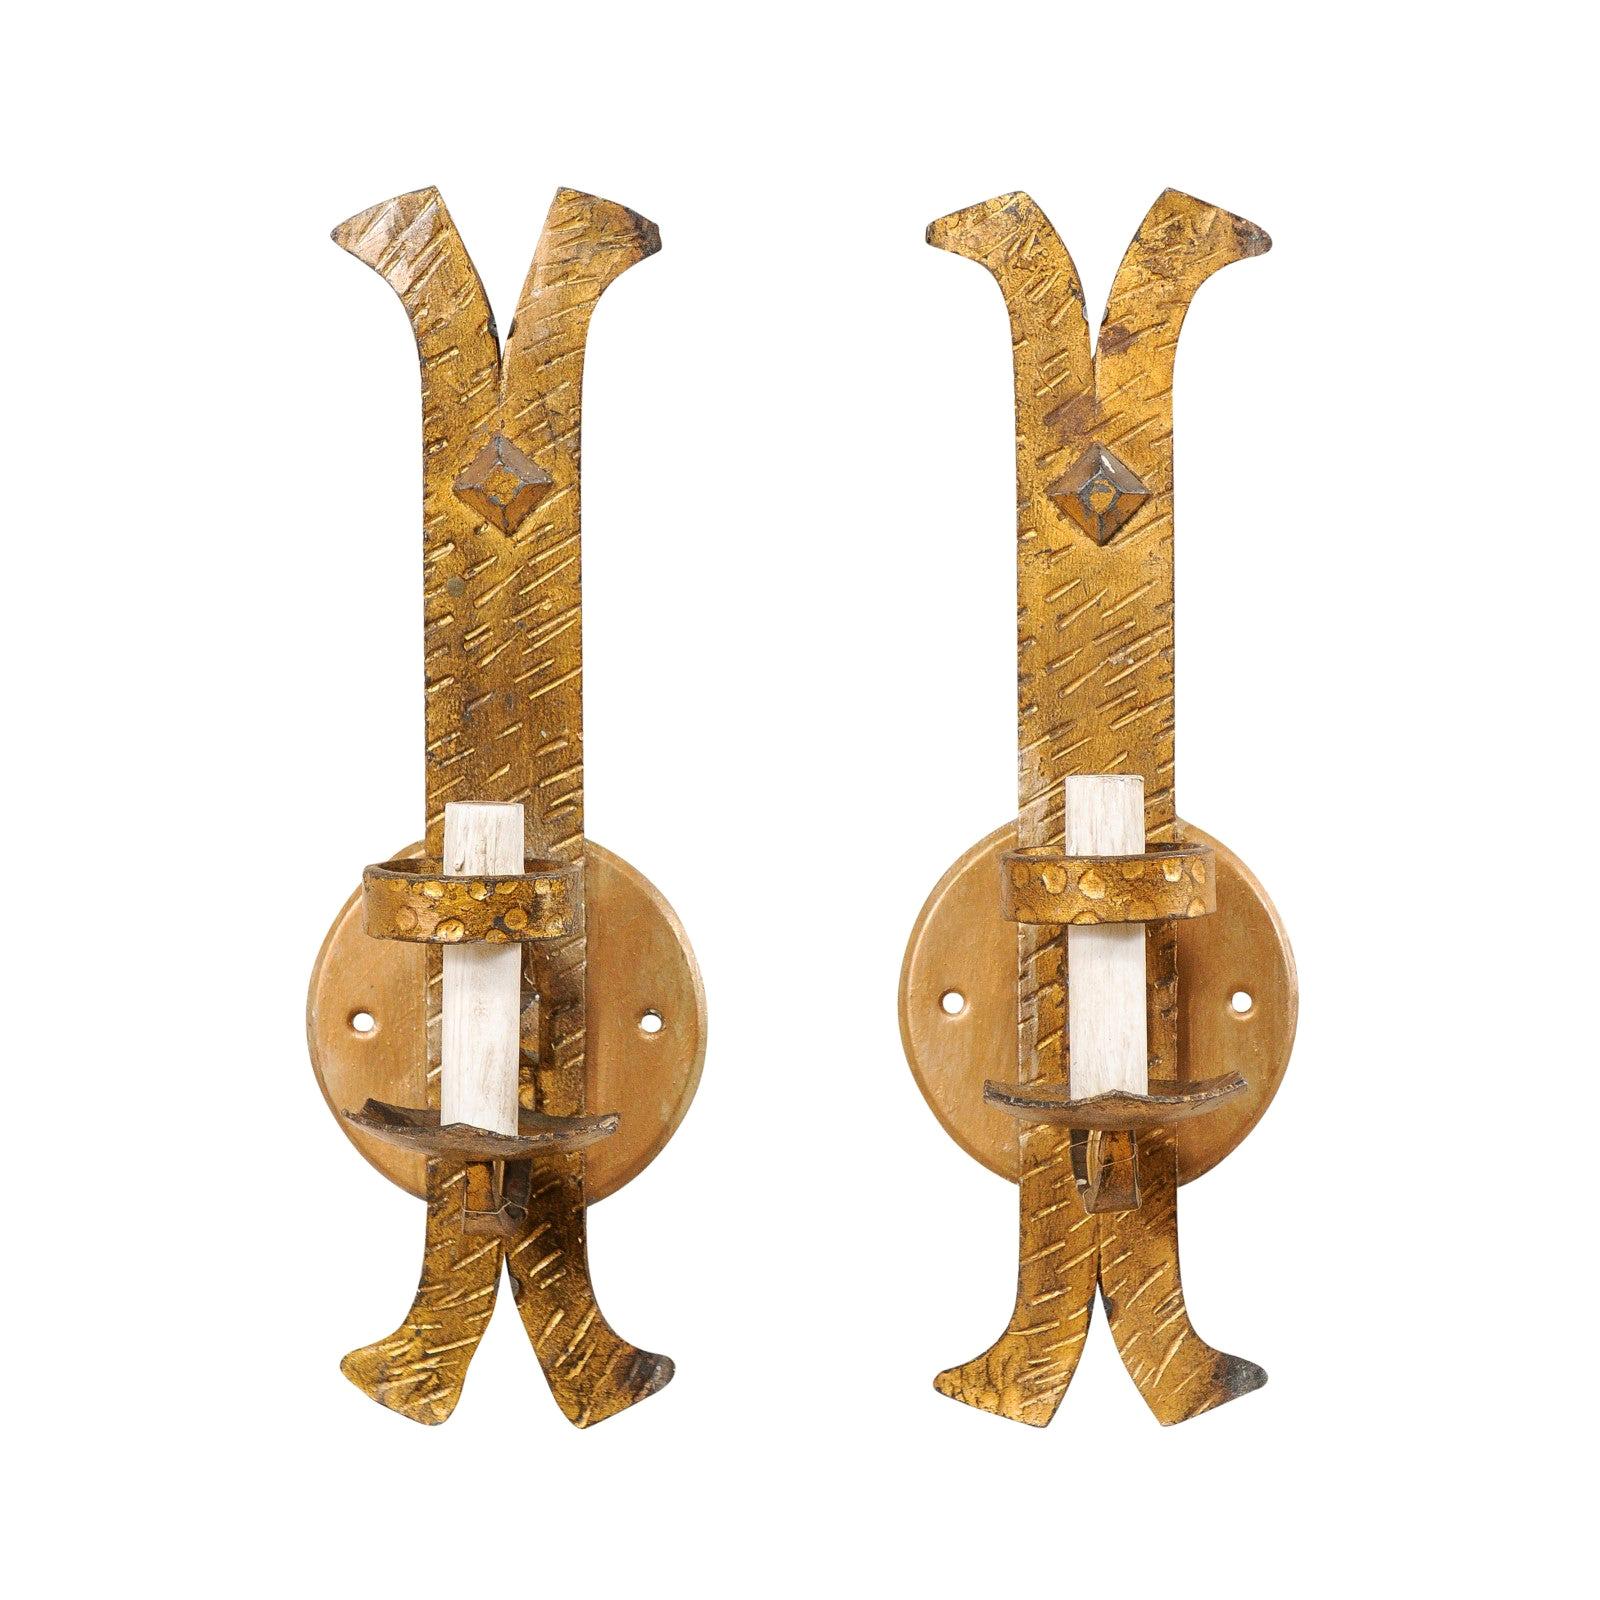 Pair of French Single-Light Gold-Tone Iron Sconces with Textured Finish